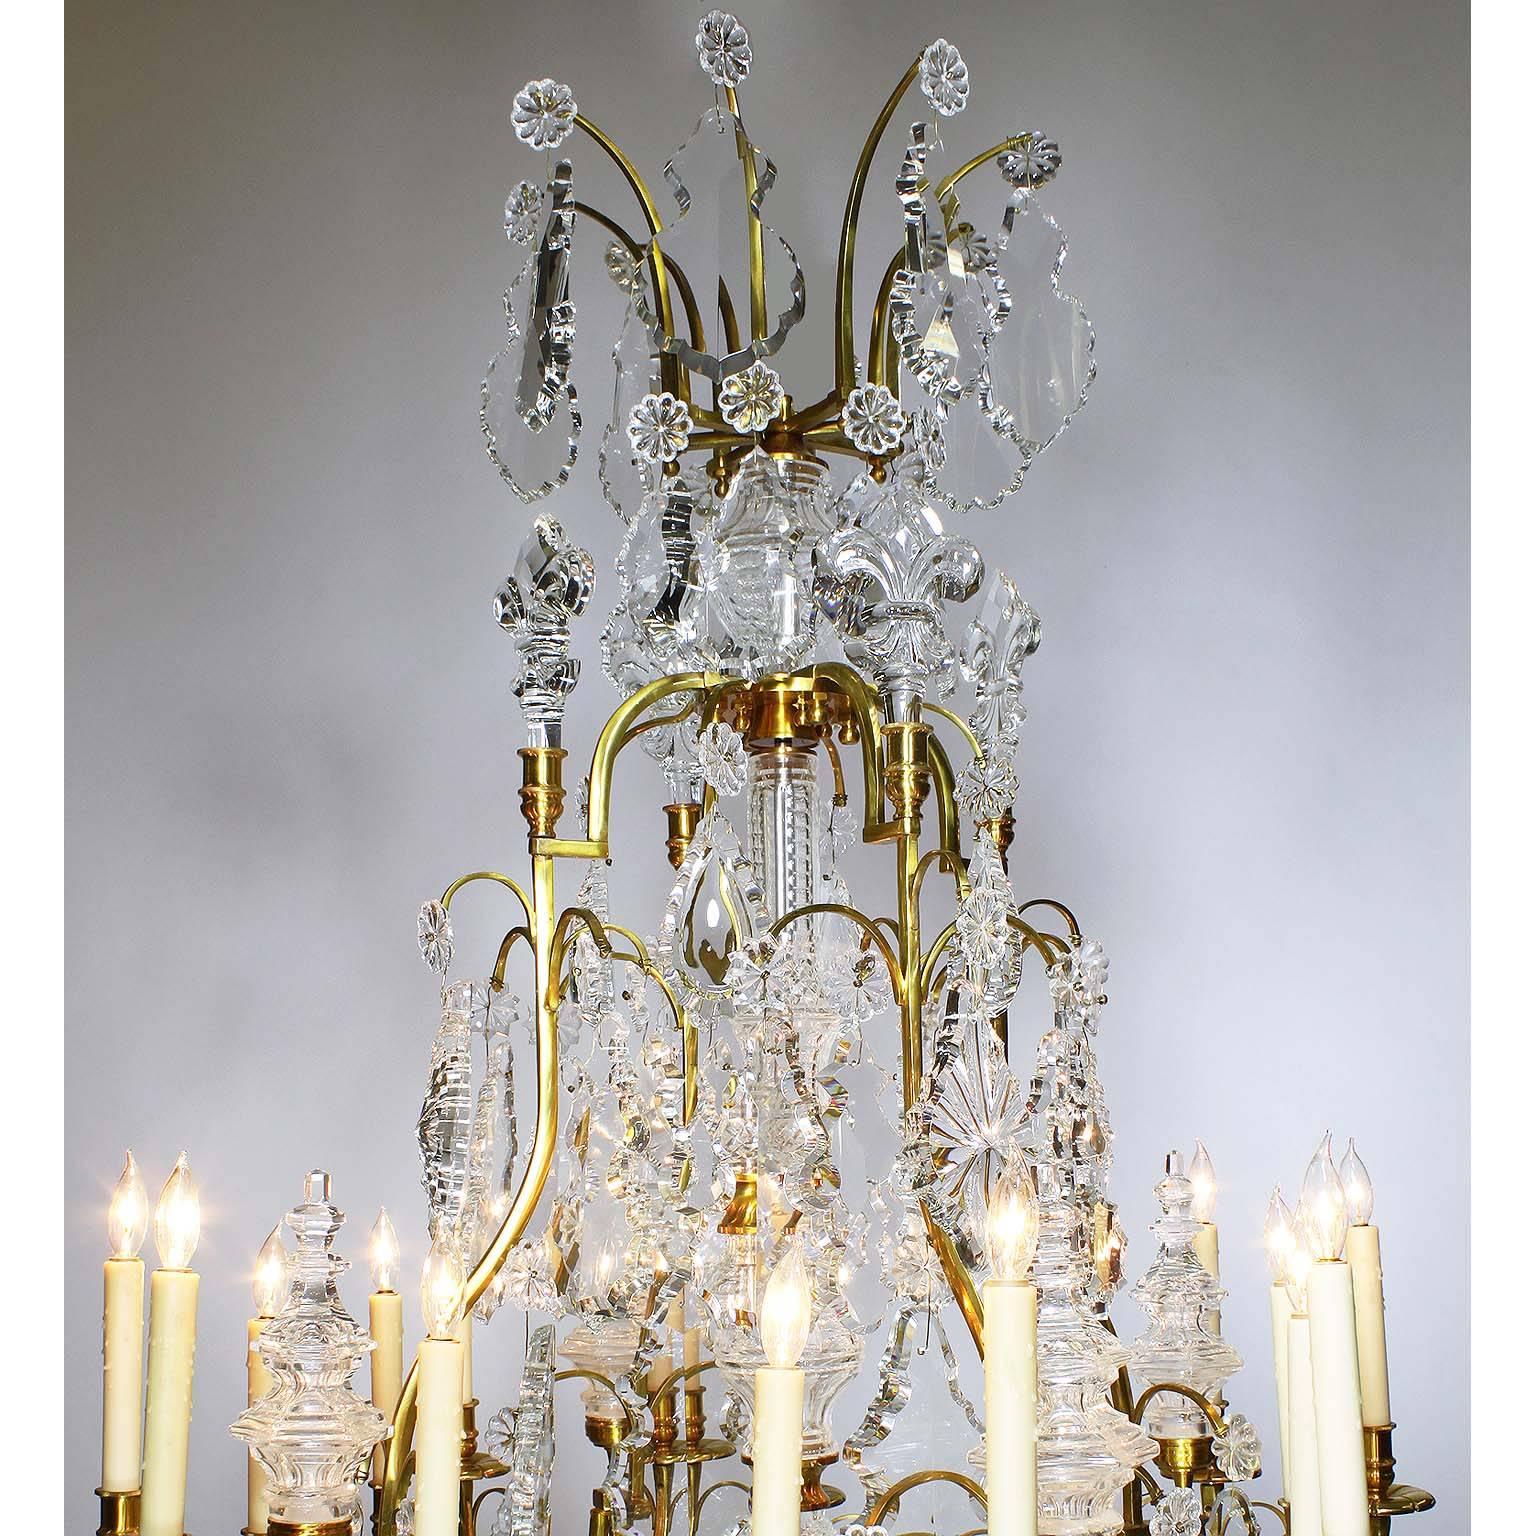 A large pair of Louis XV style gilt bronze and cut-glass sixteen-light chandeliers. The solid bronze frames surmounted with pendants, molded towers, fleur de lis and a central support, manner of Baccarat. circa 20th century.

Measures: Height: 67